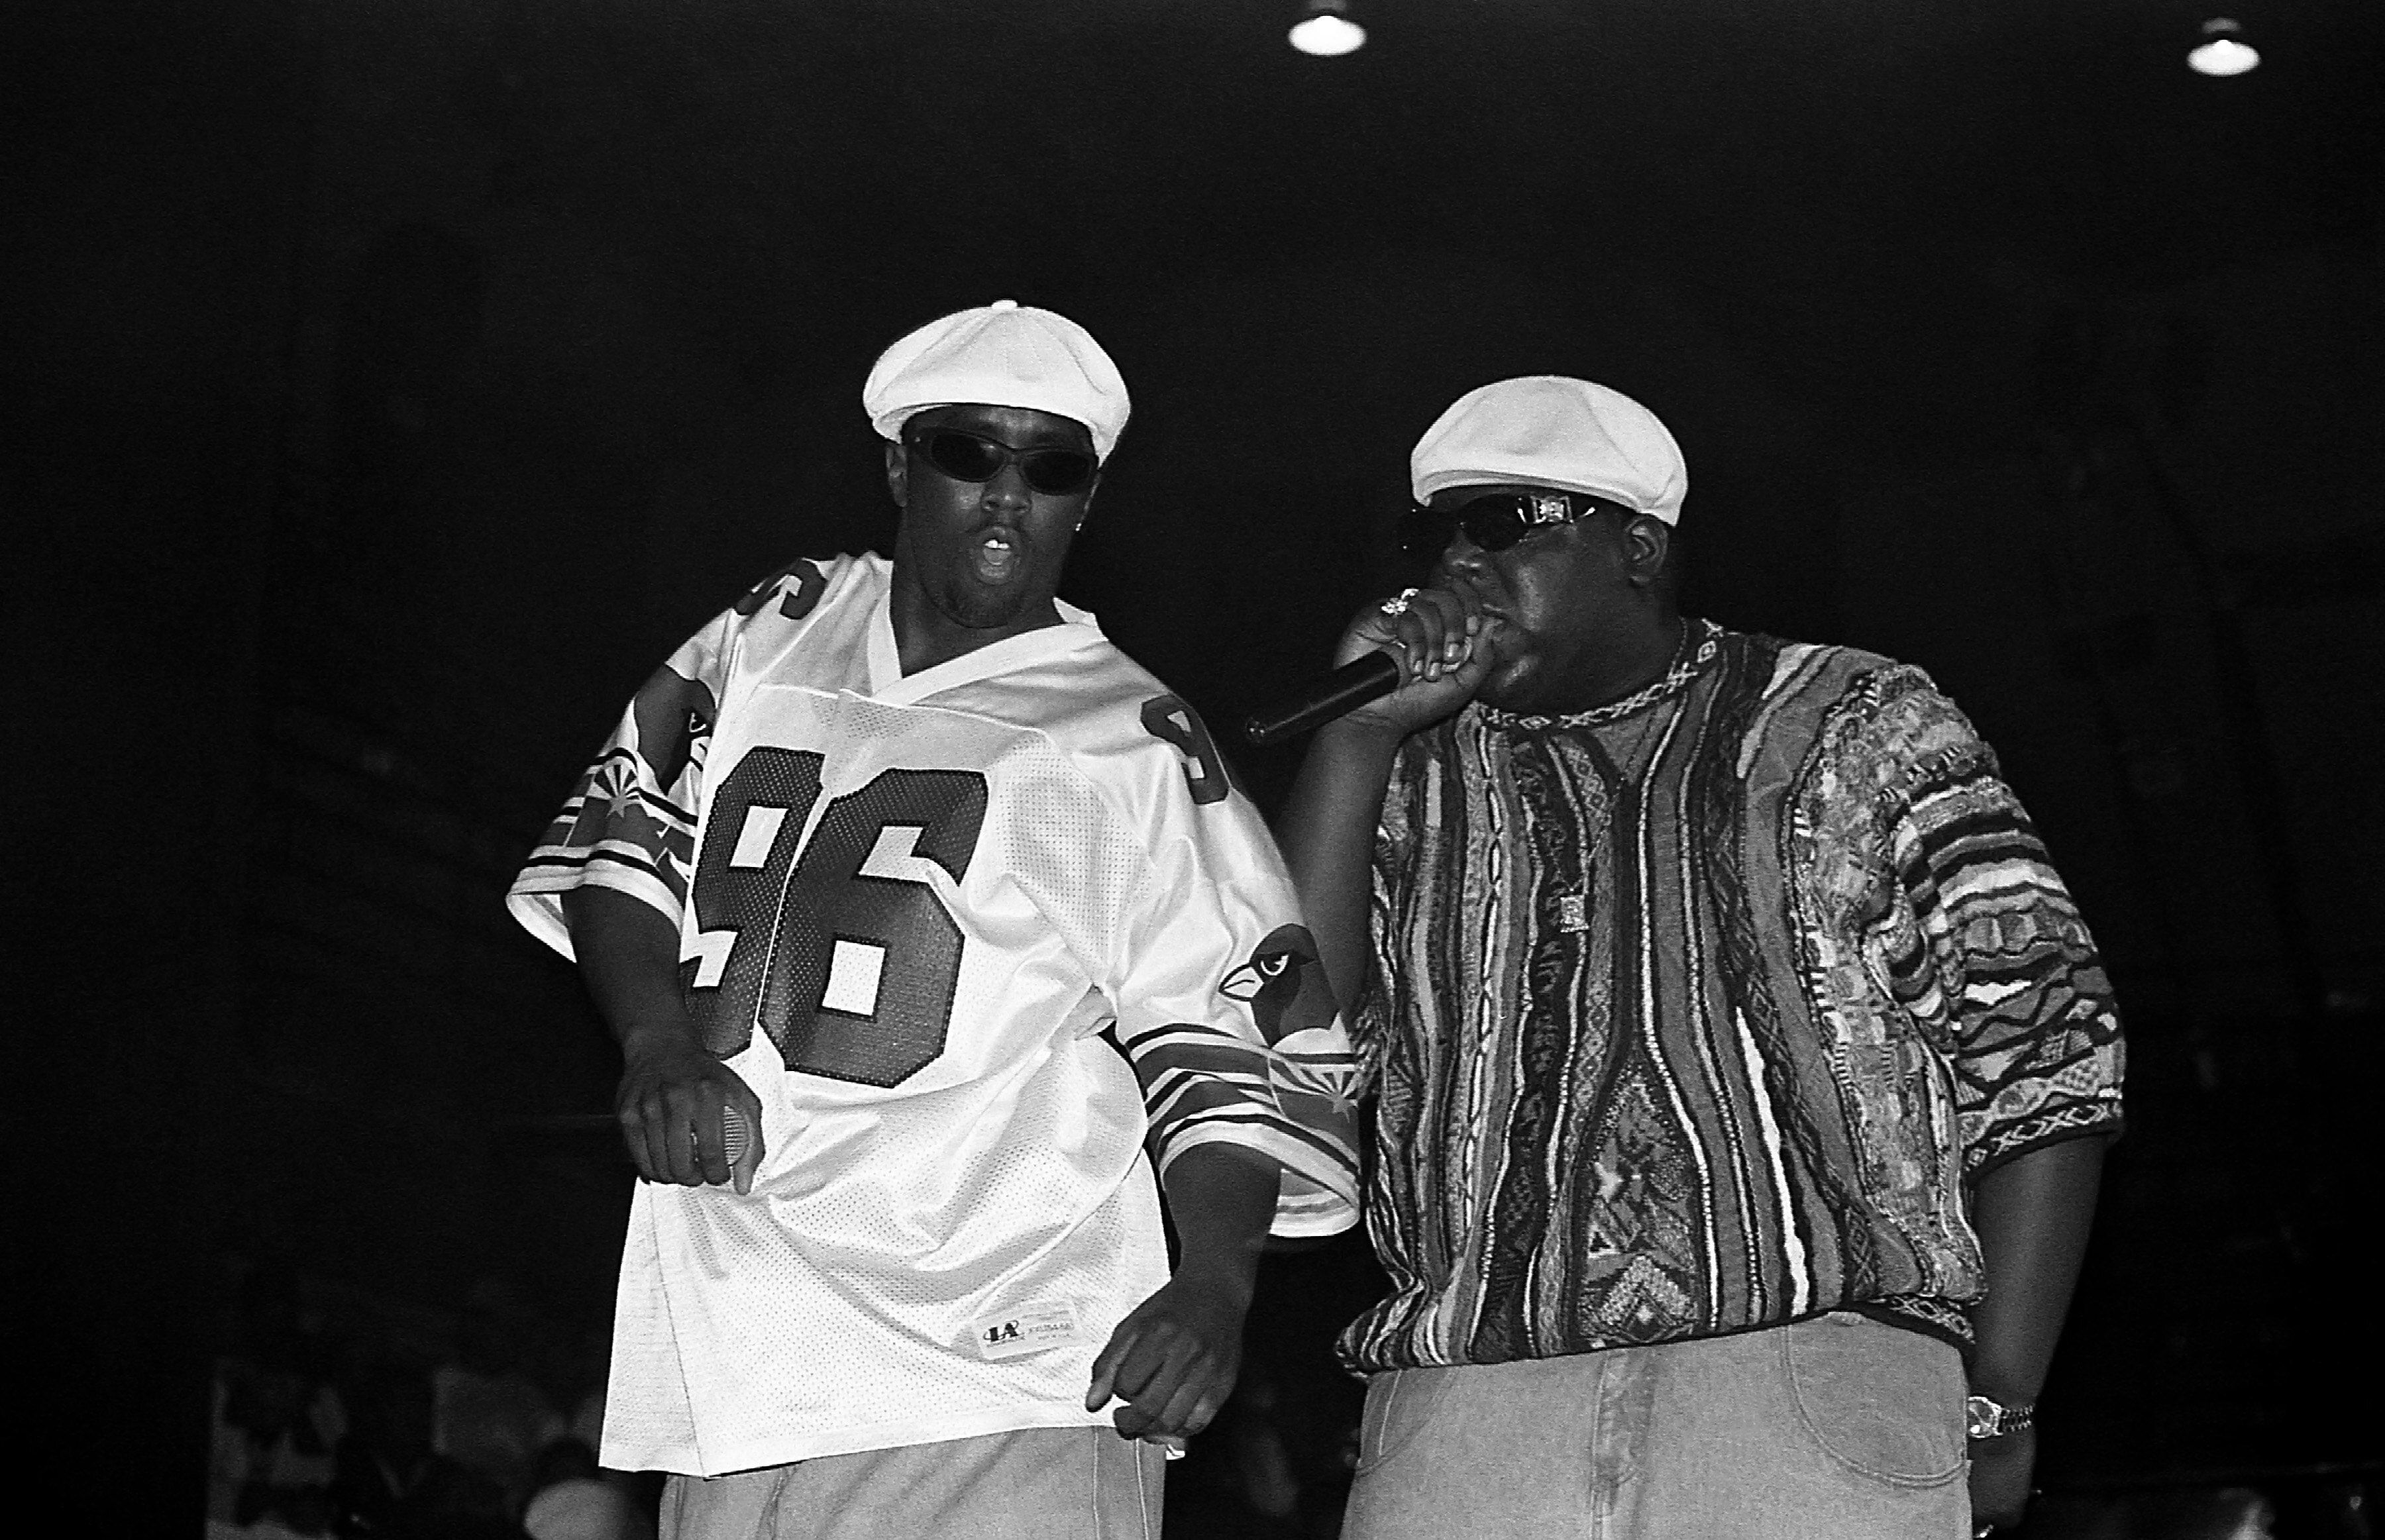 Rappers Sean 'Puffy' Combs and Notorious B.I.G, performs at the International Amphitheatre in Chicago, Illinois in April 1995. Credit: Raymond Boyd/Getty Images